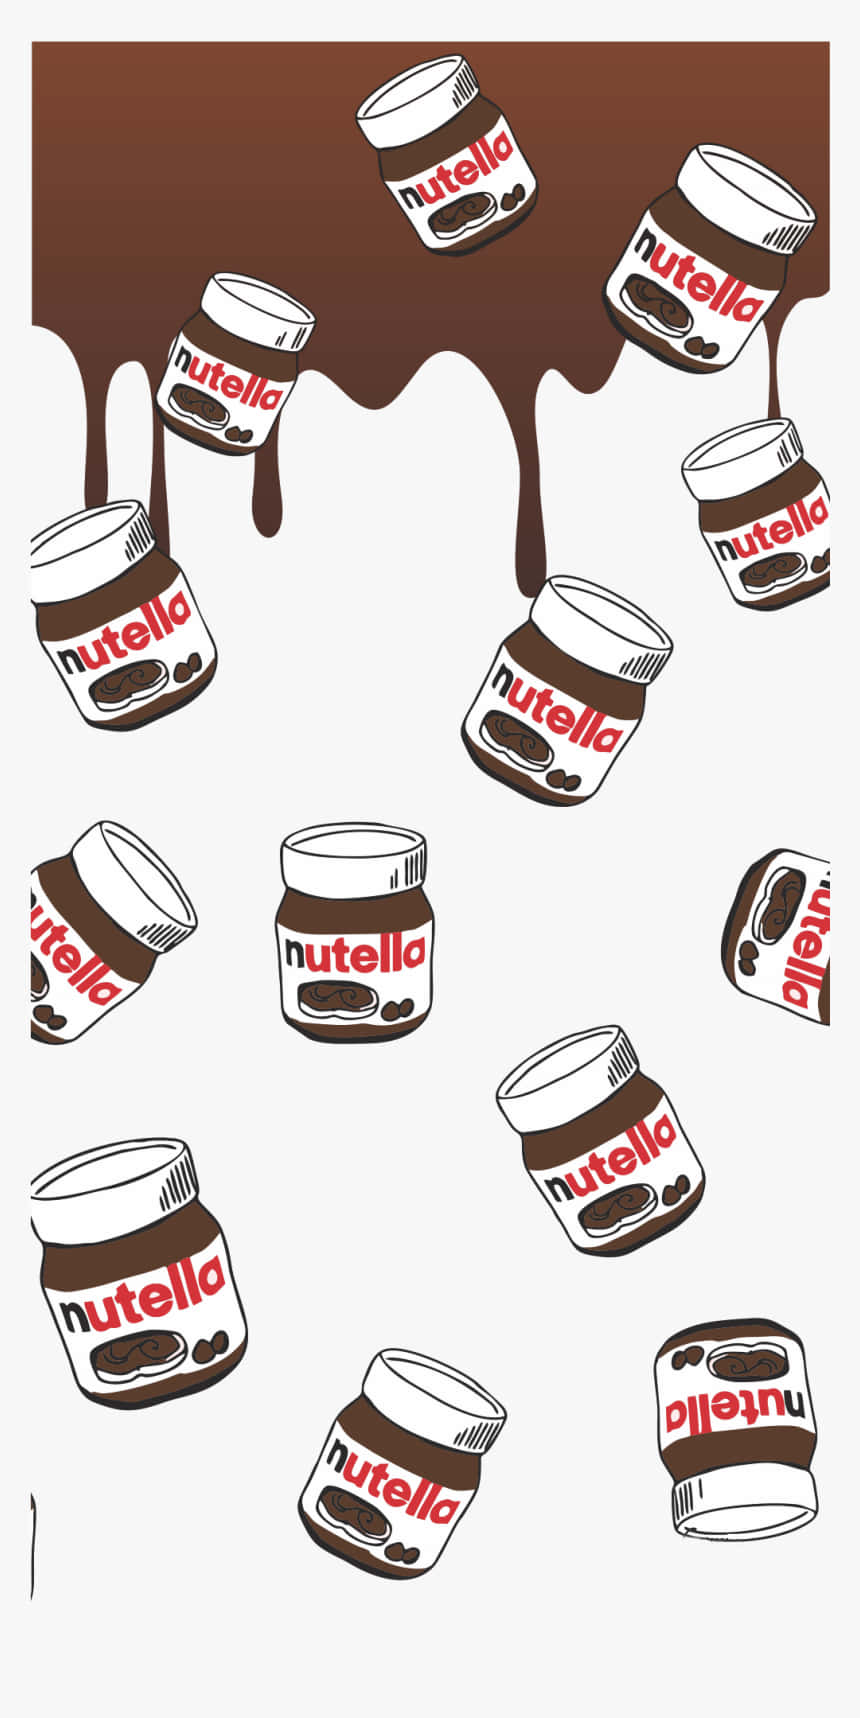 Nutella Jars With Chocolate Dripping From Them Wallpaper